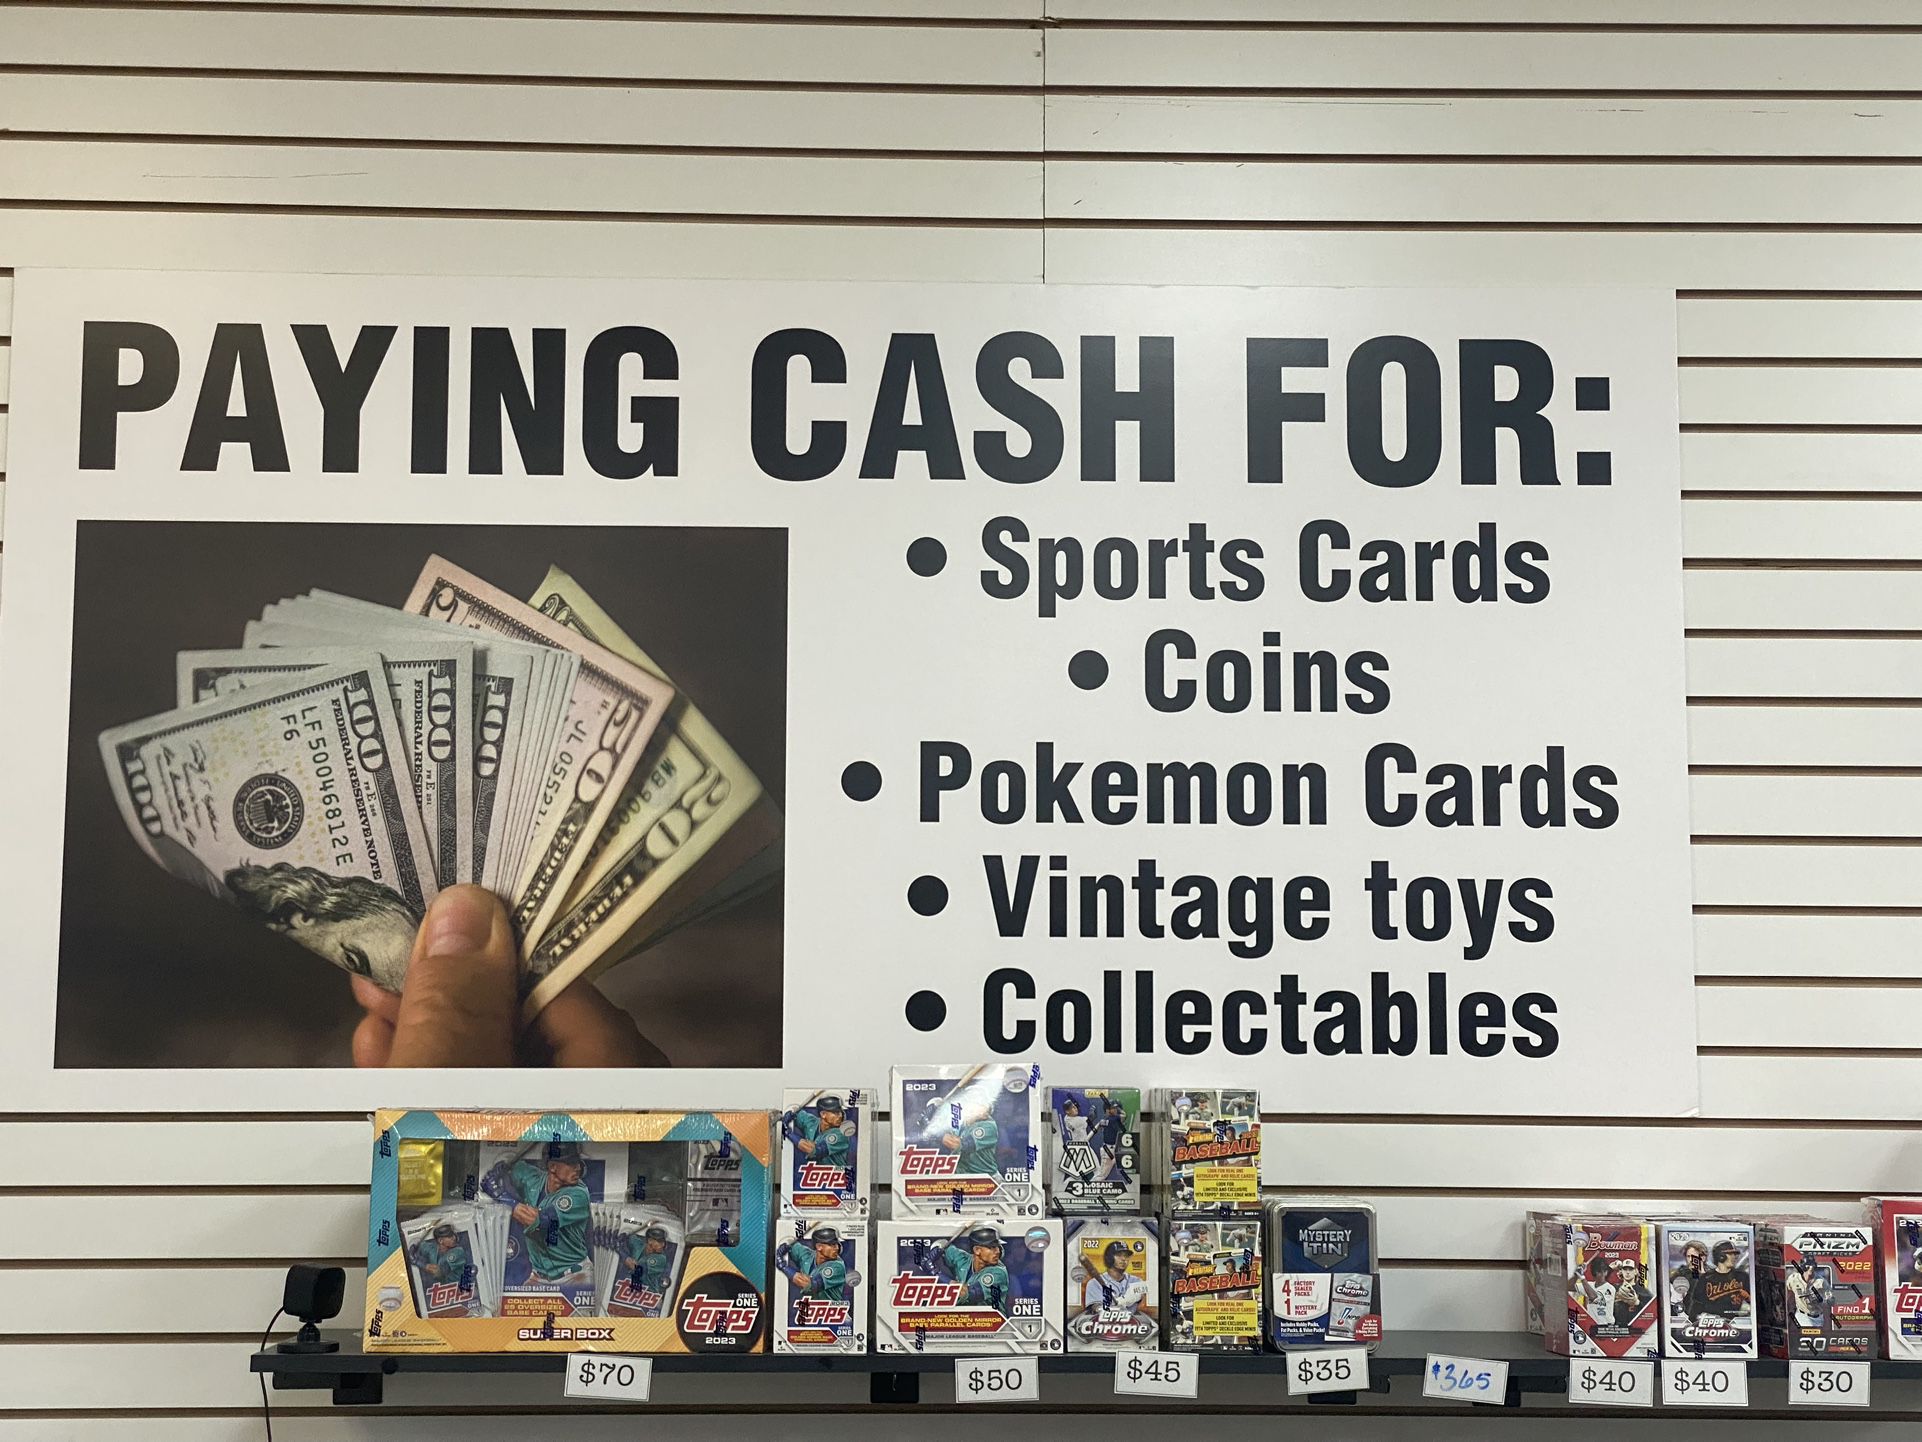 Paying Cash For Sports Cards, Pokemon Cards, Coins, Vintage Toys, And More!!!!